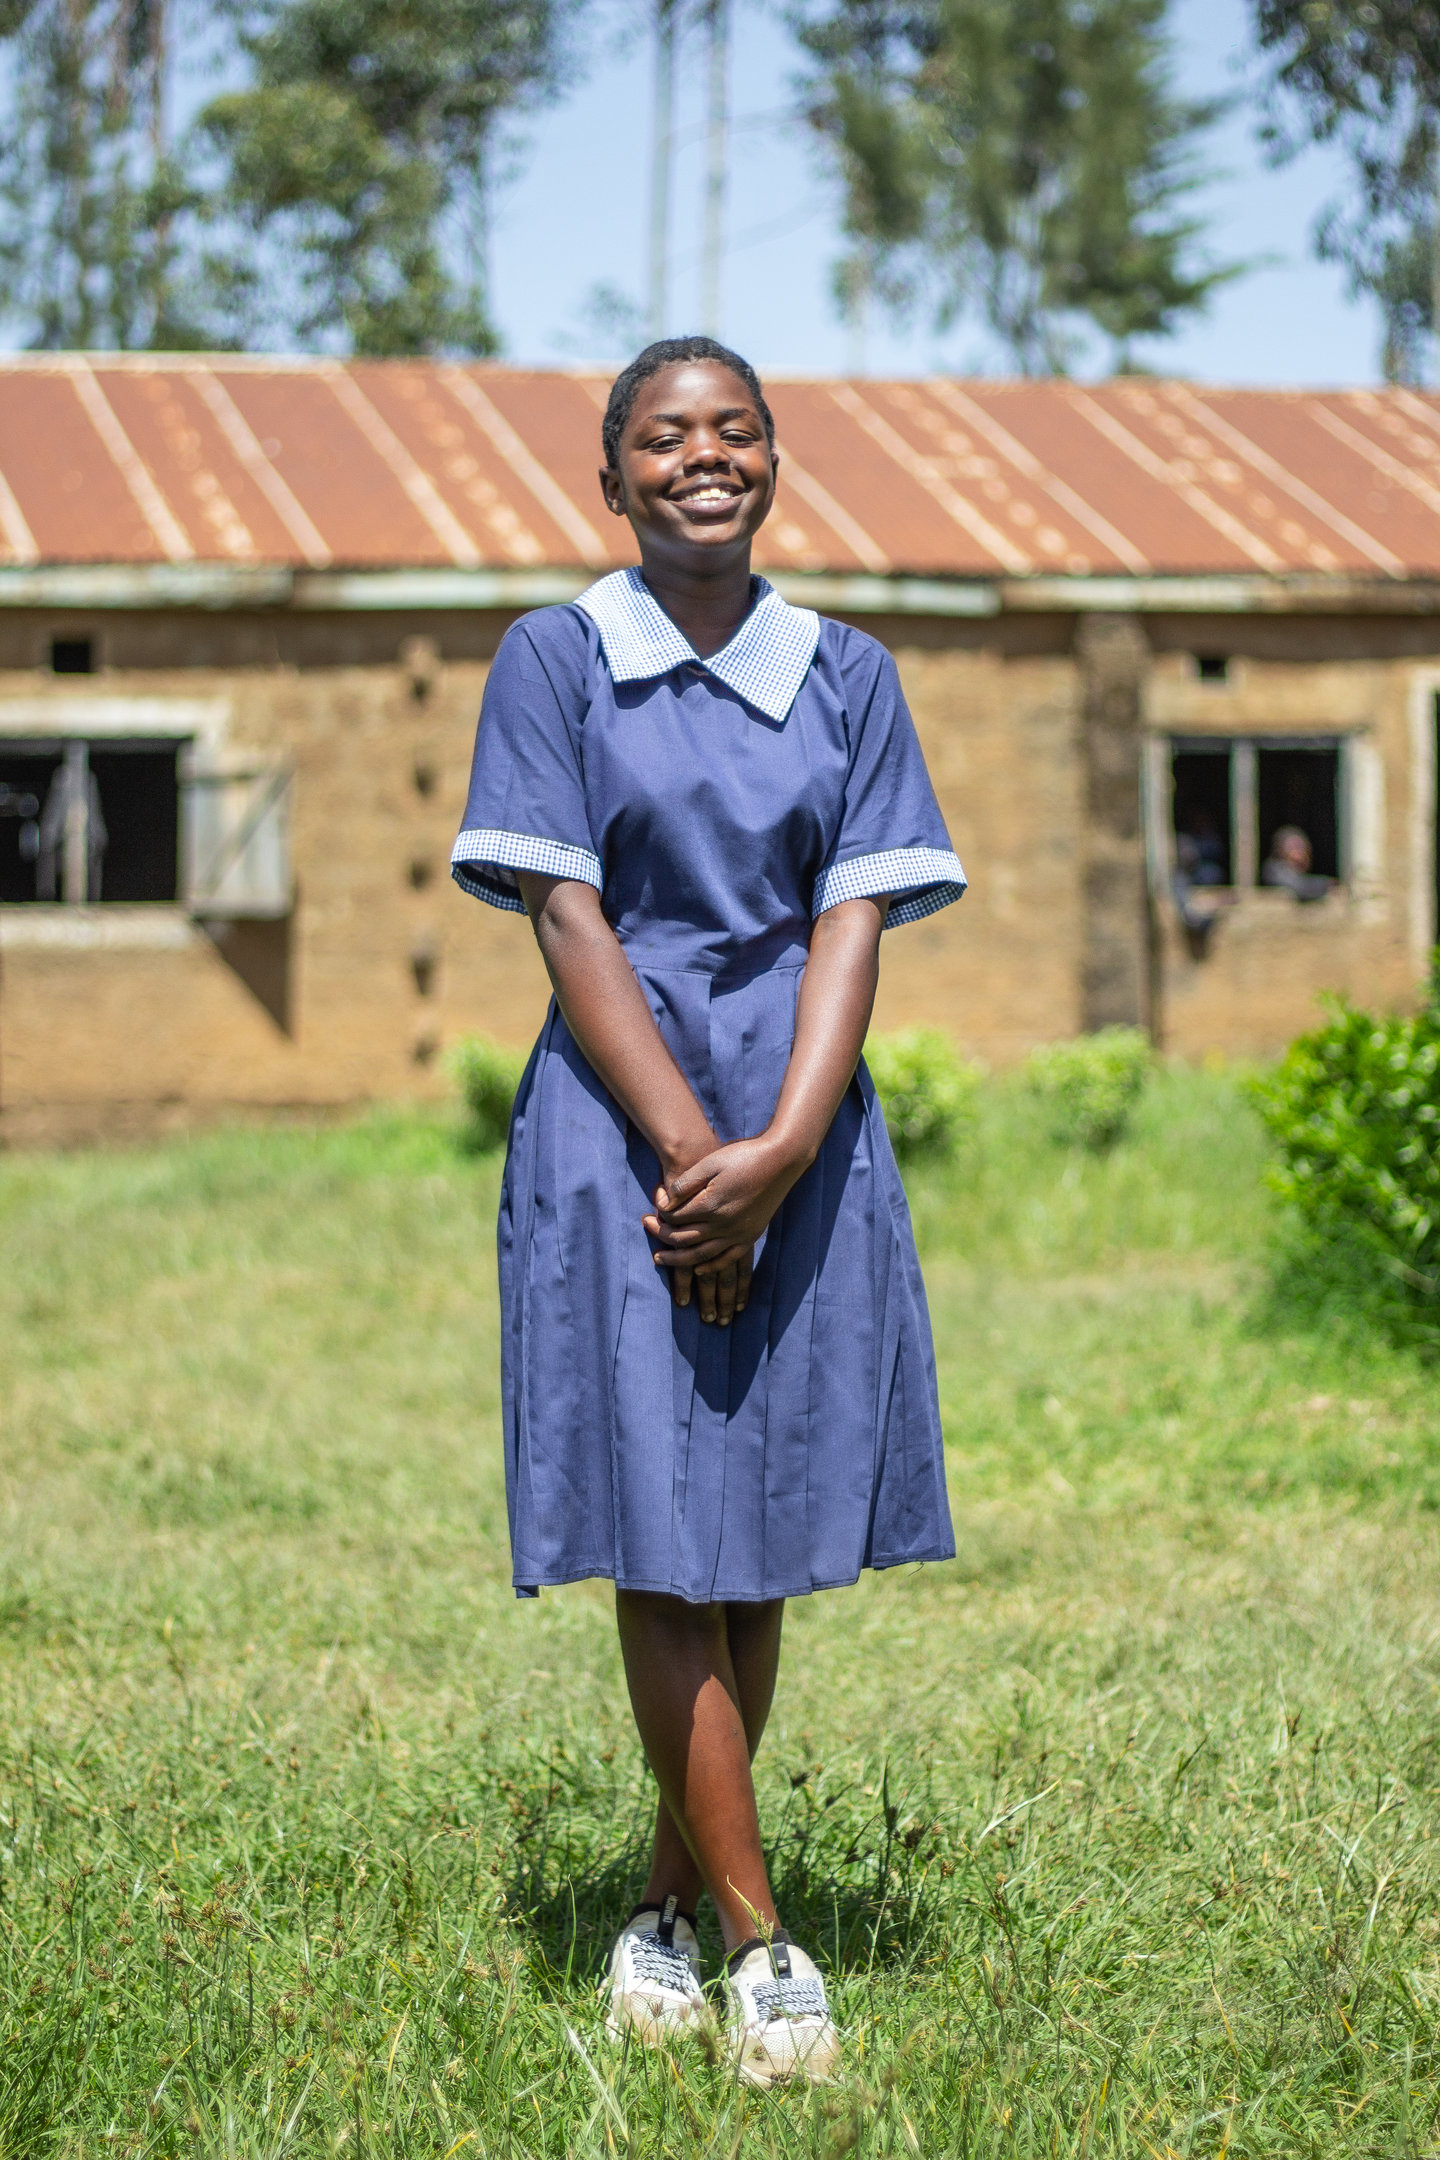 A female student wears a blue school uniform and stands outside in a grass field.